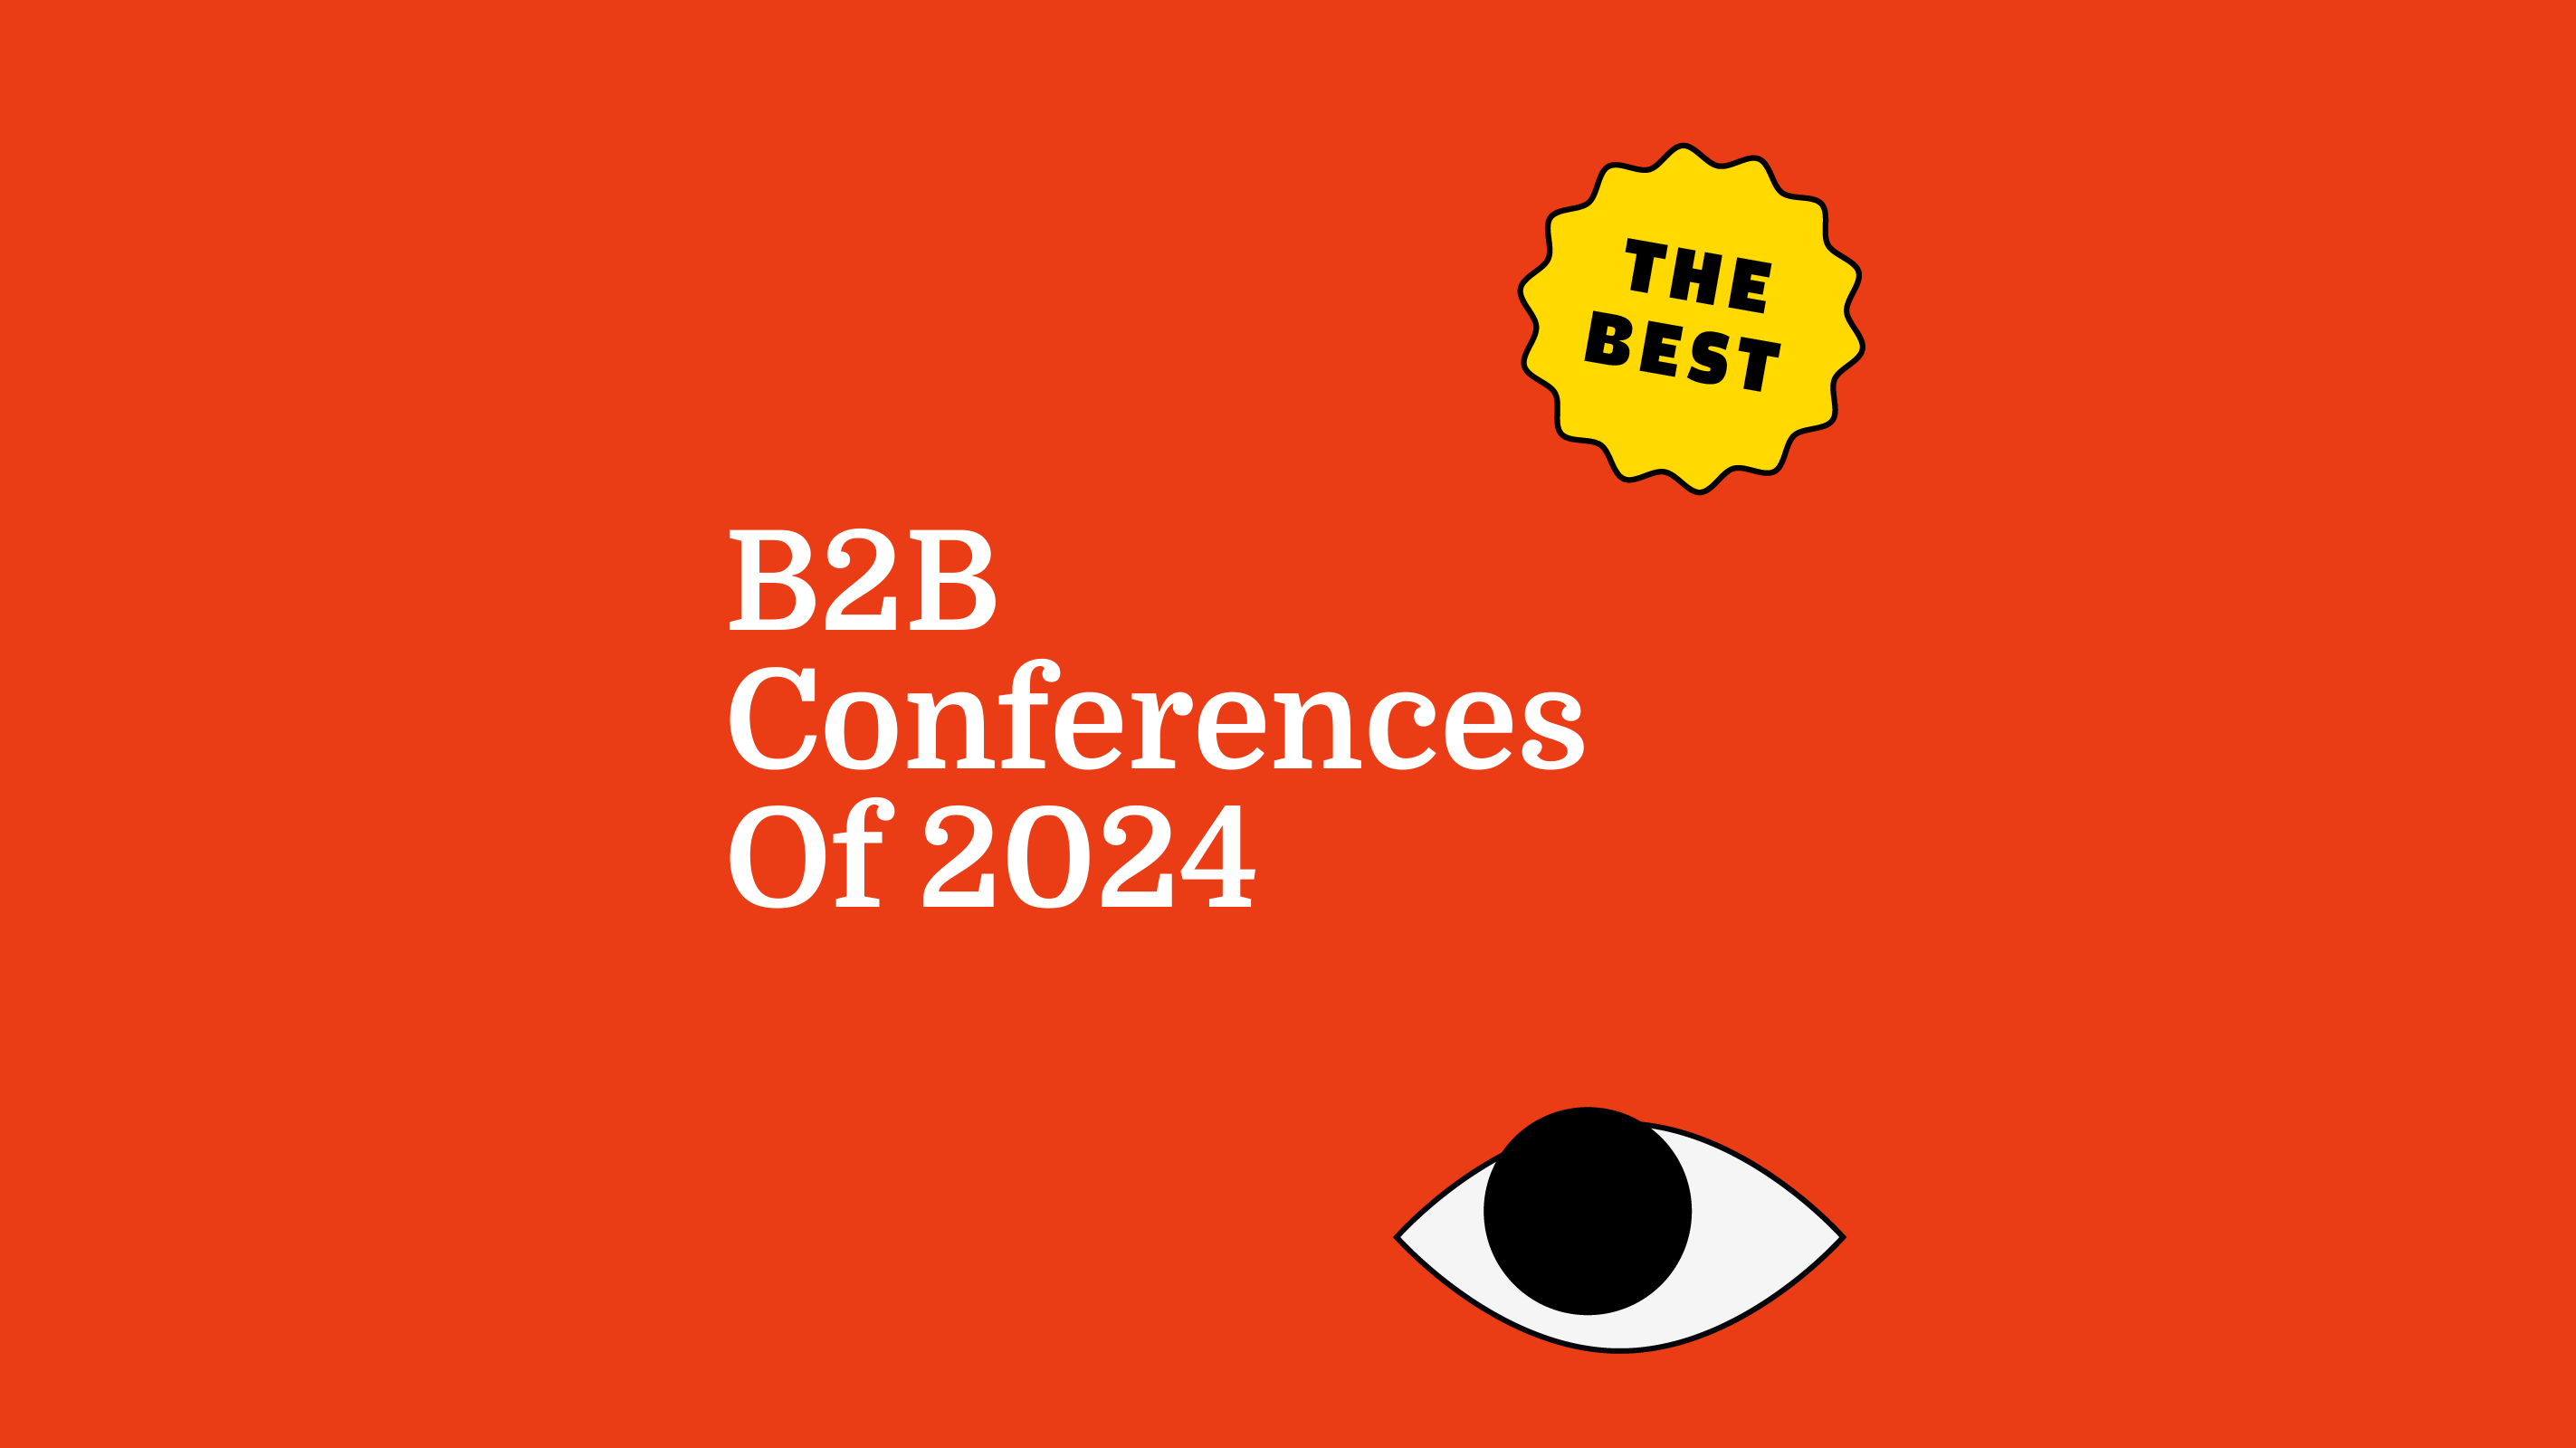 REV-b2b-conferences-of-2024-featured-image-4897